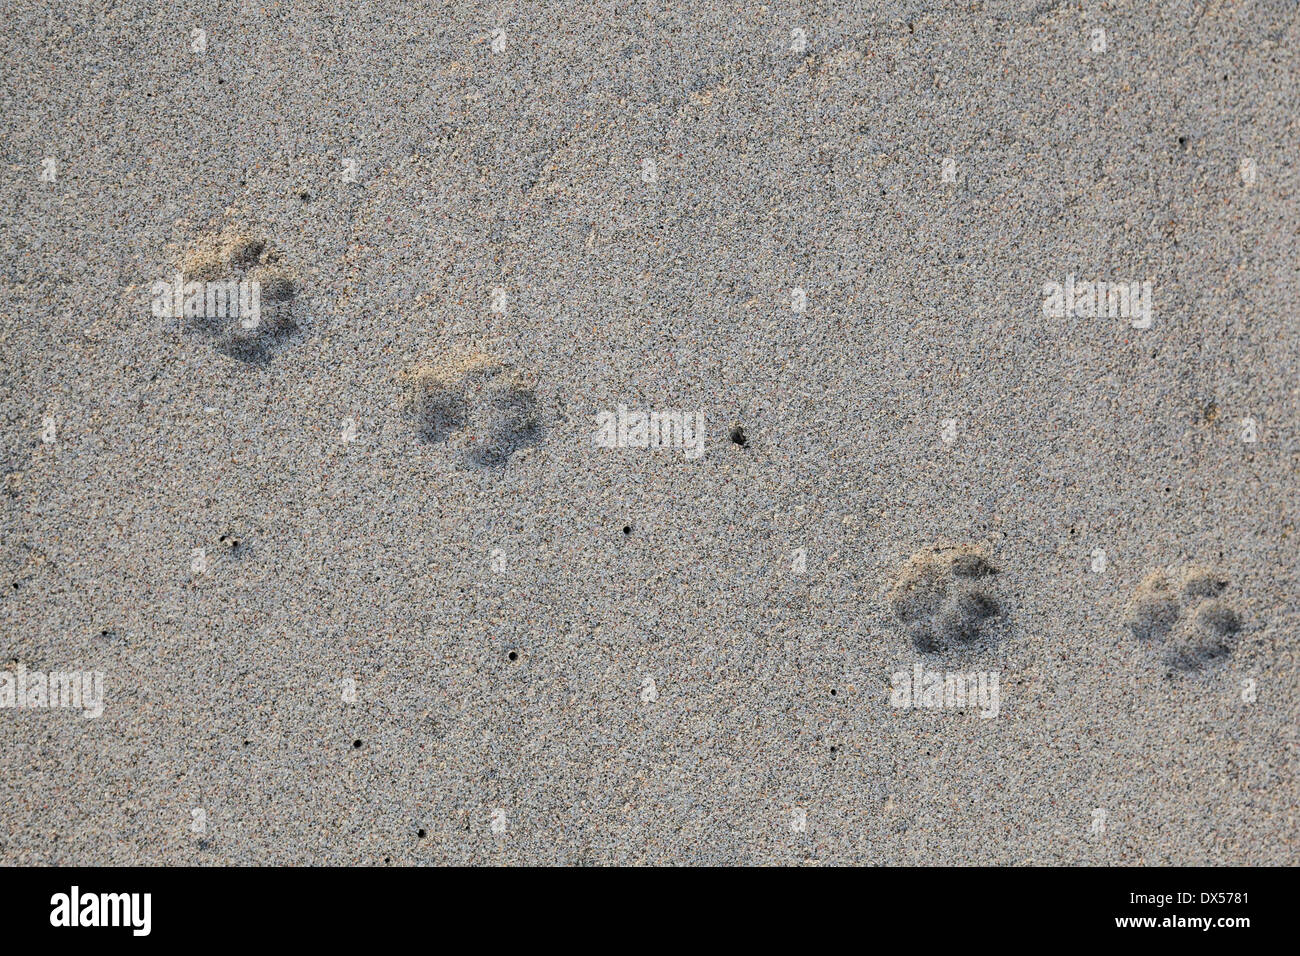 Imprints of cat paws in the sand, Oman Stock Photo